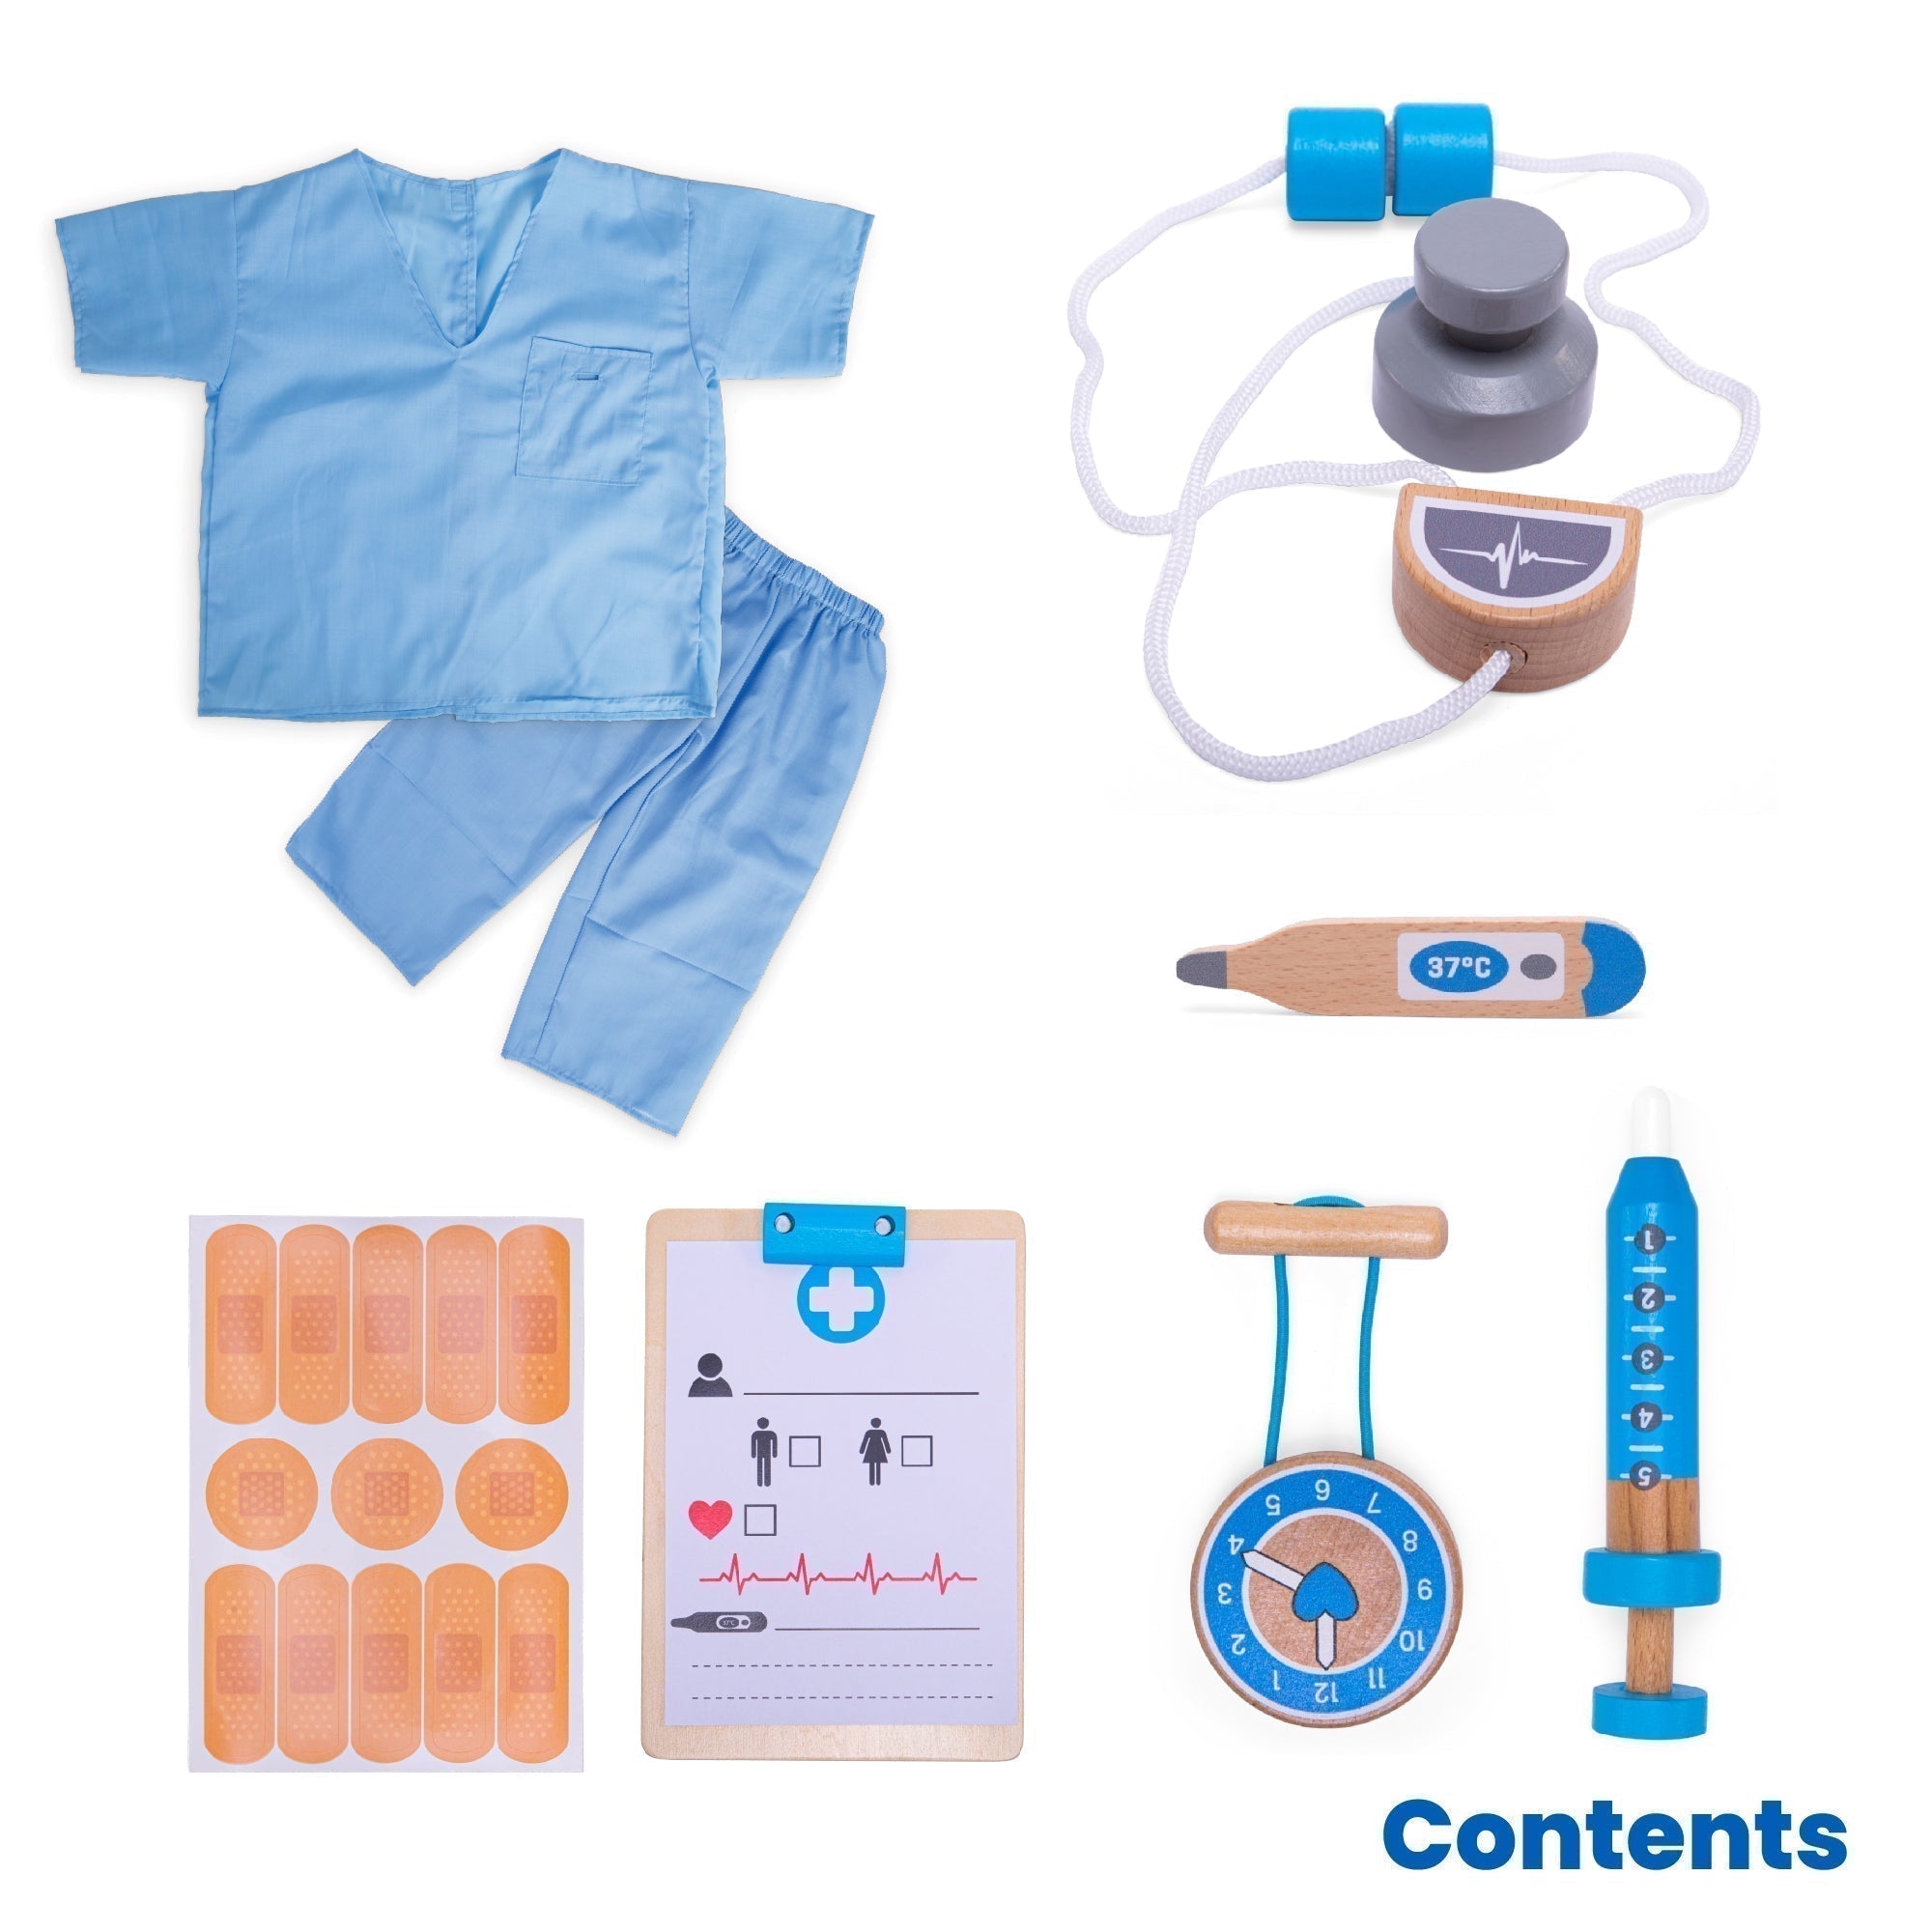 Medic Dress Up, Help nurse teddies, dolls or family members back to health with this realistic-looking Medic Kids Fancy Dress Costume. This doctor dress up set comes with blue scrubs, a wooden stethoscope, clipboard, thermometer, pocket watch and syringe. Our kids dress up costumes are suitable for ages 3-5 years. Jacket measures 40.5cm W x 47cm H. Adjustable trousers measure 42cm-80cm (16"-30") waist; leg length - 55cm. Dress up products have been tested to the latest EN71 & REACH regulations. Medic Dress 